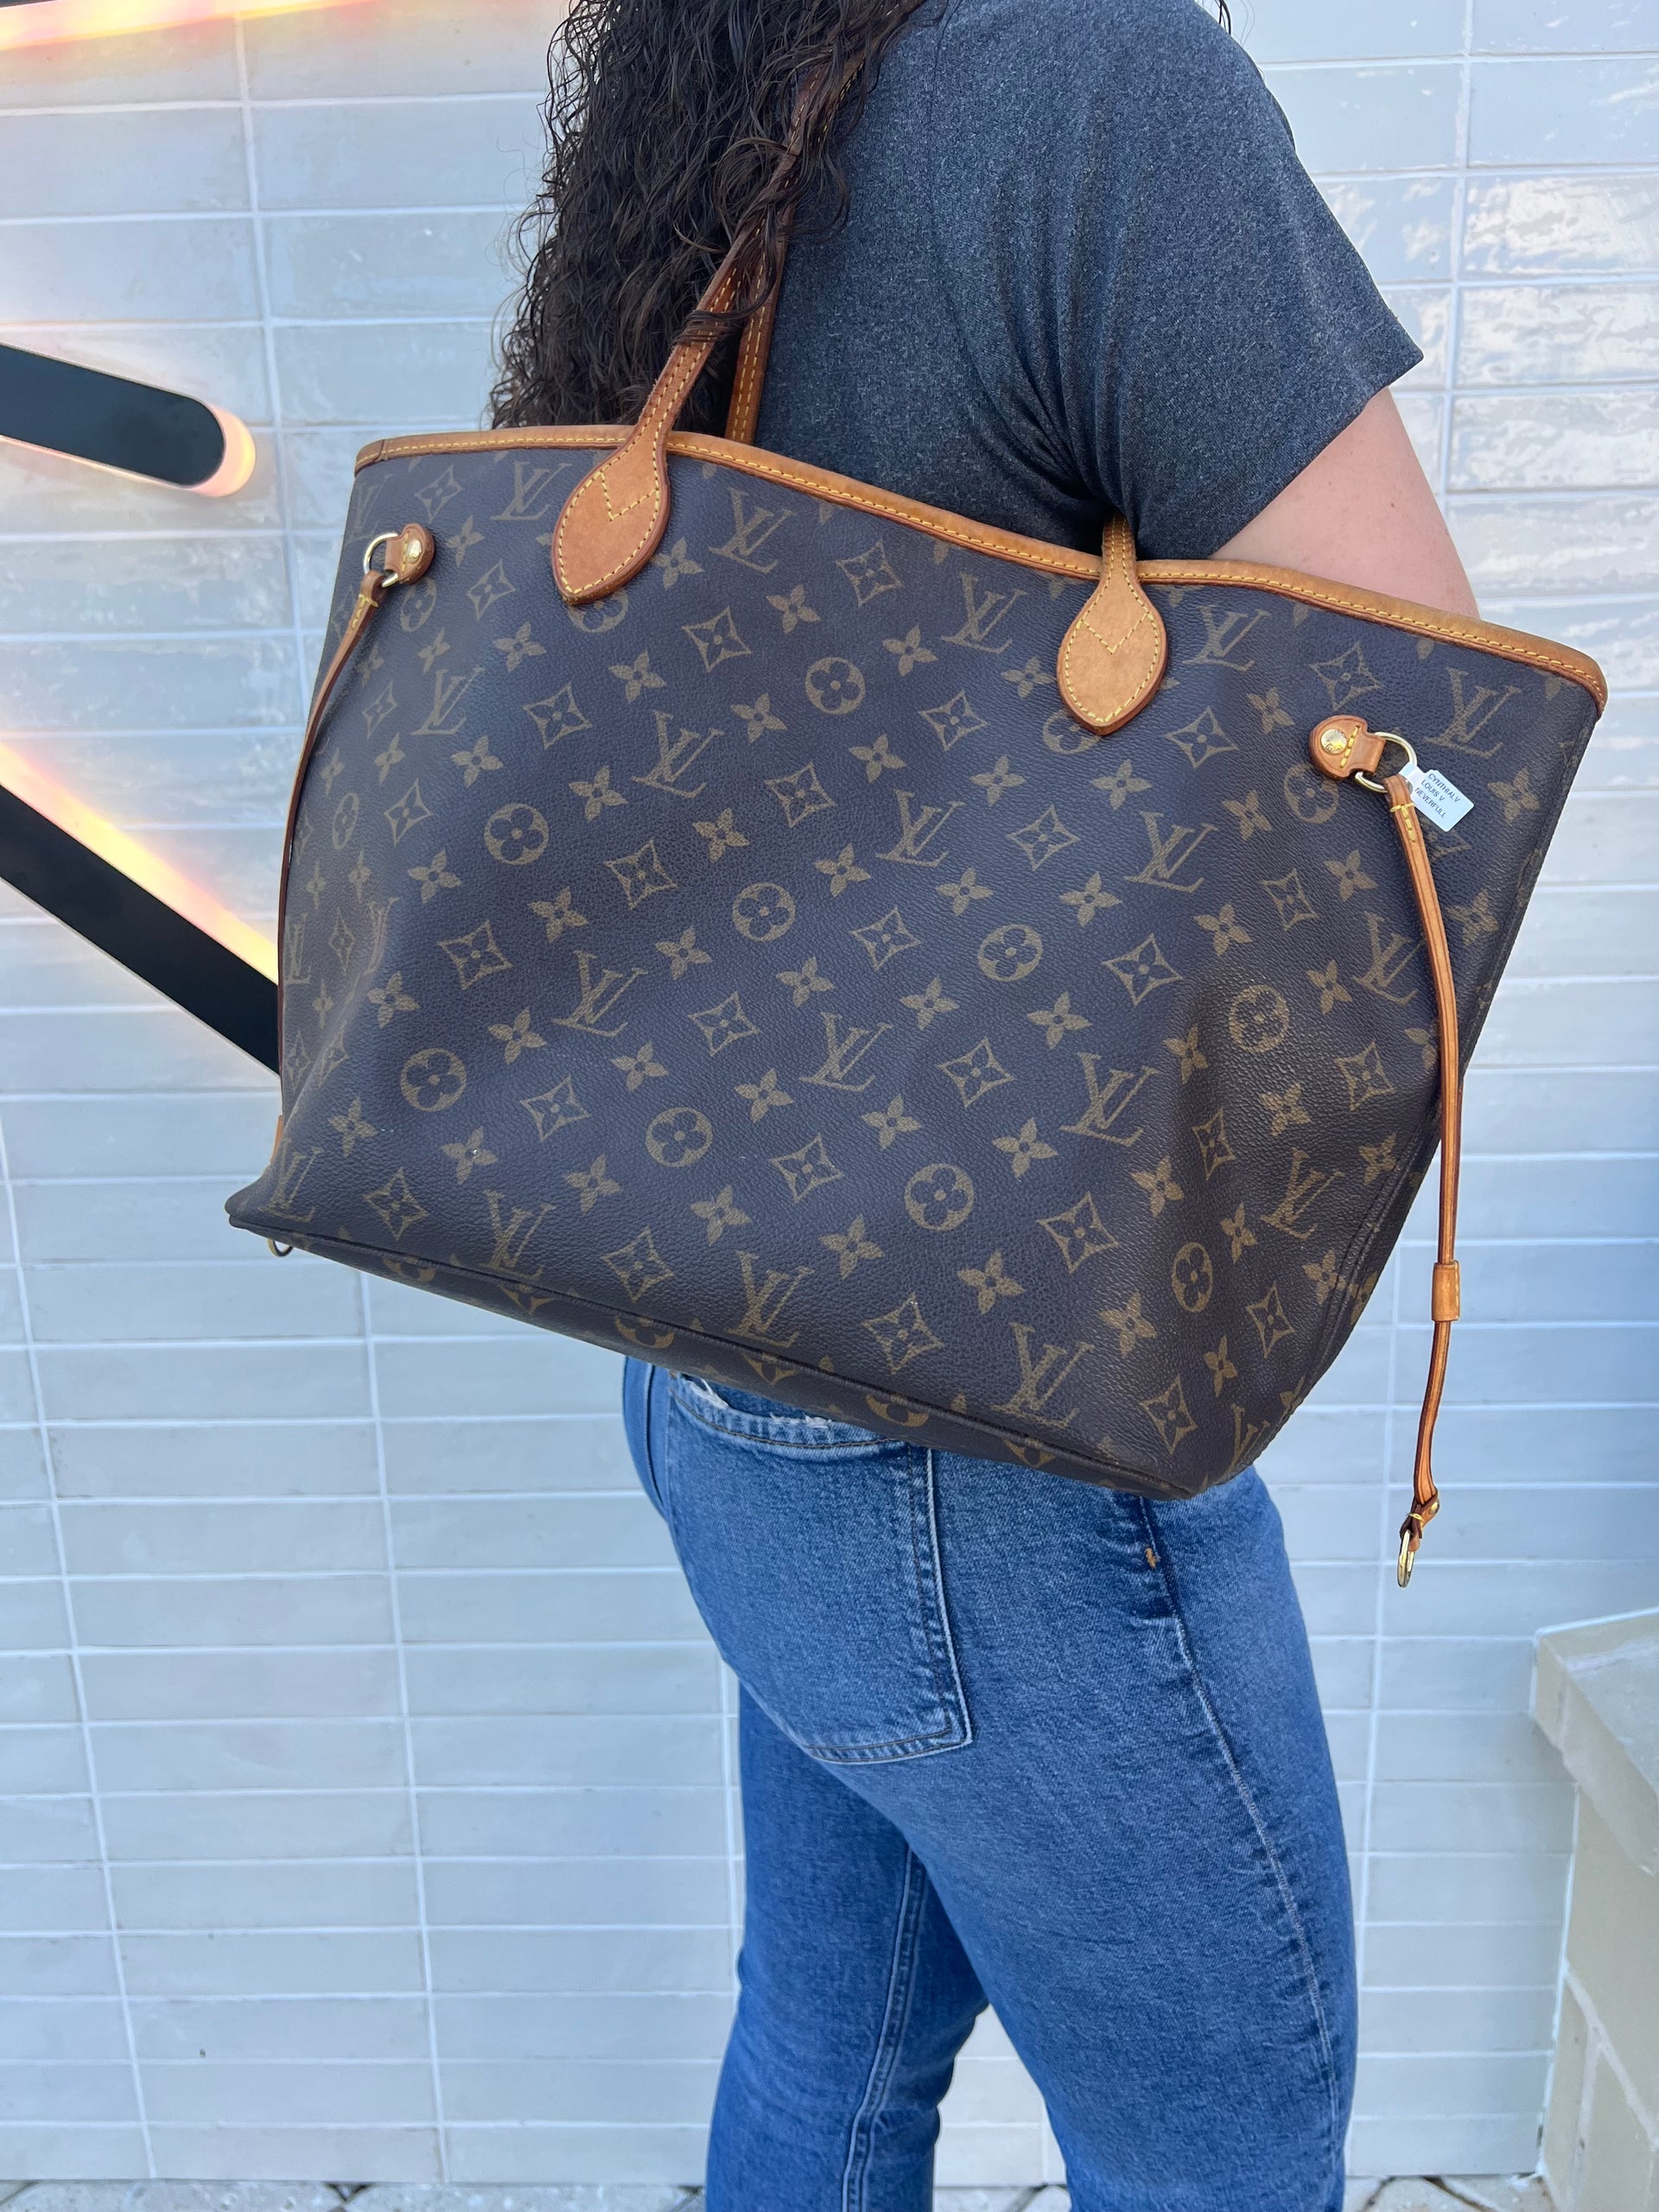 Neverfull leather tote Louis Vuitton Brown in Leather - 31575232